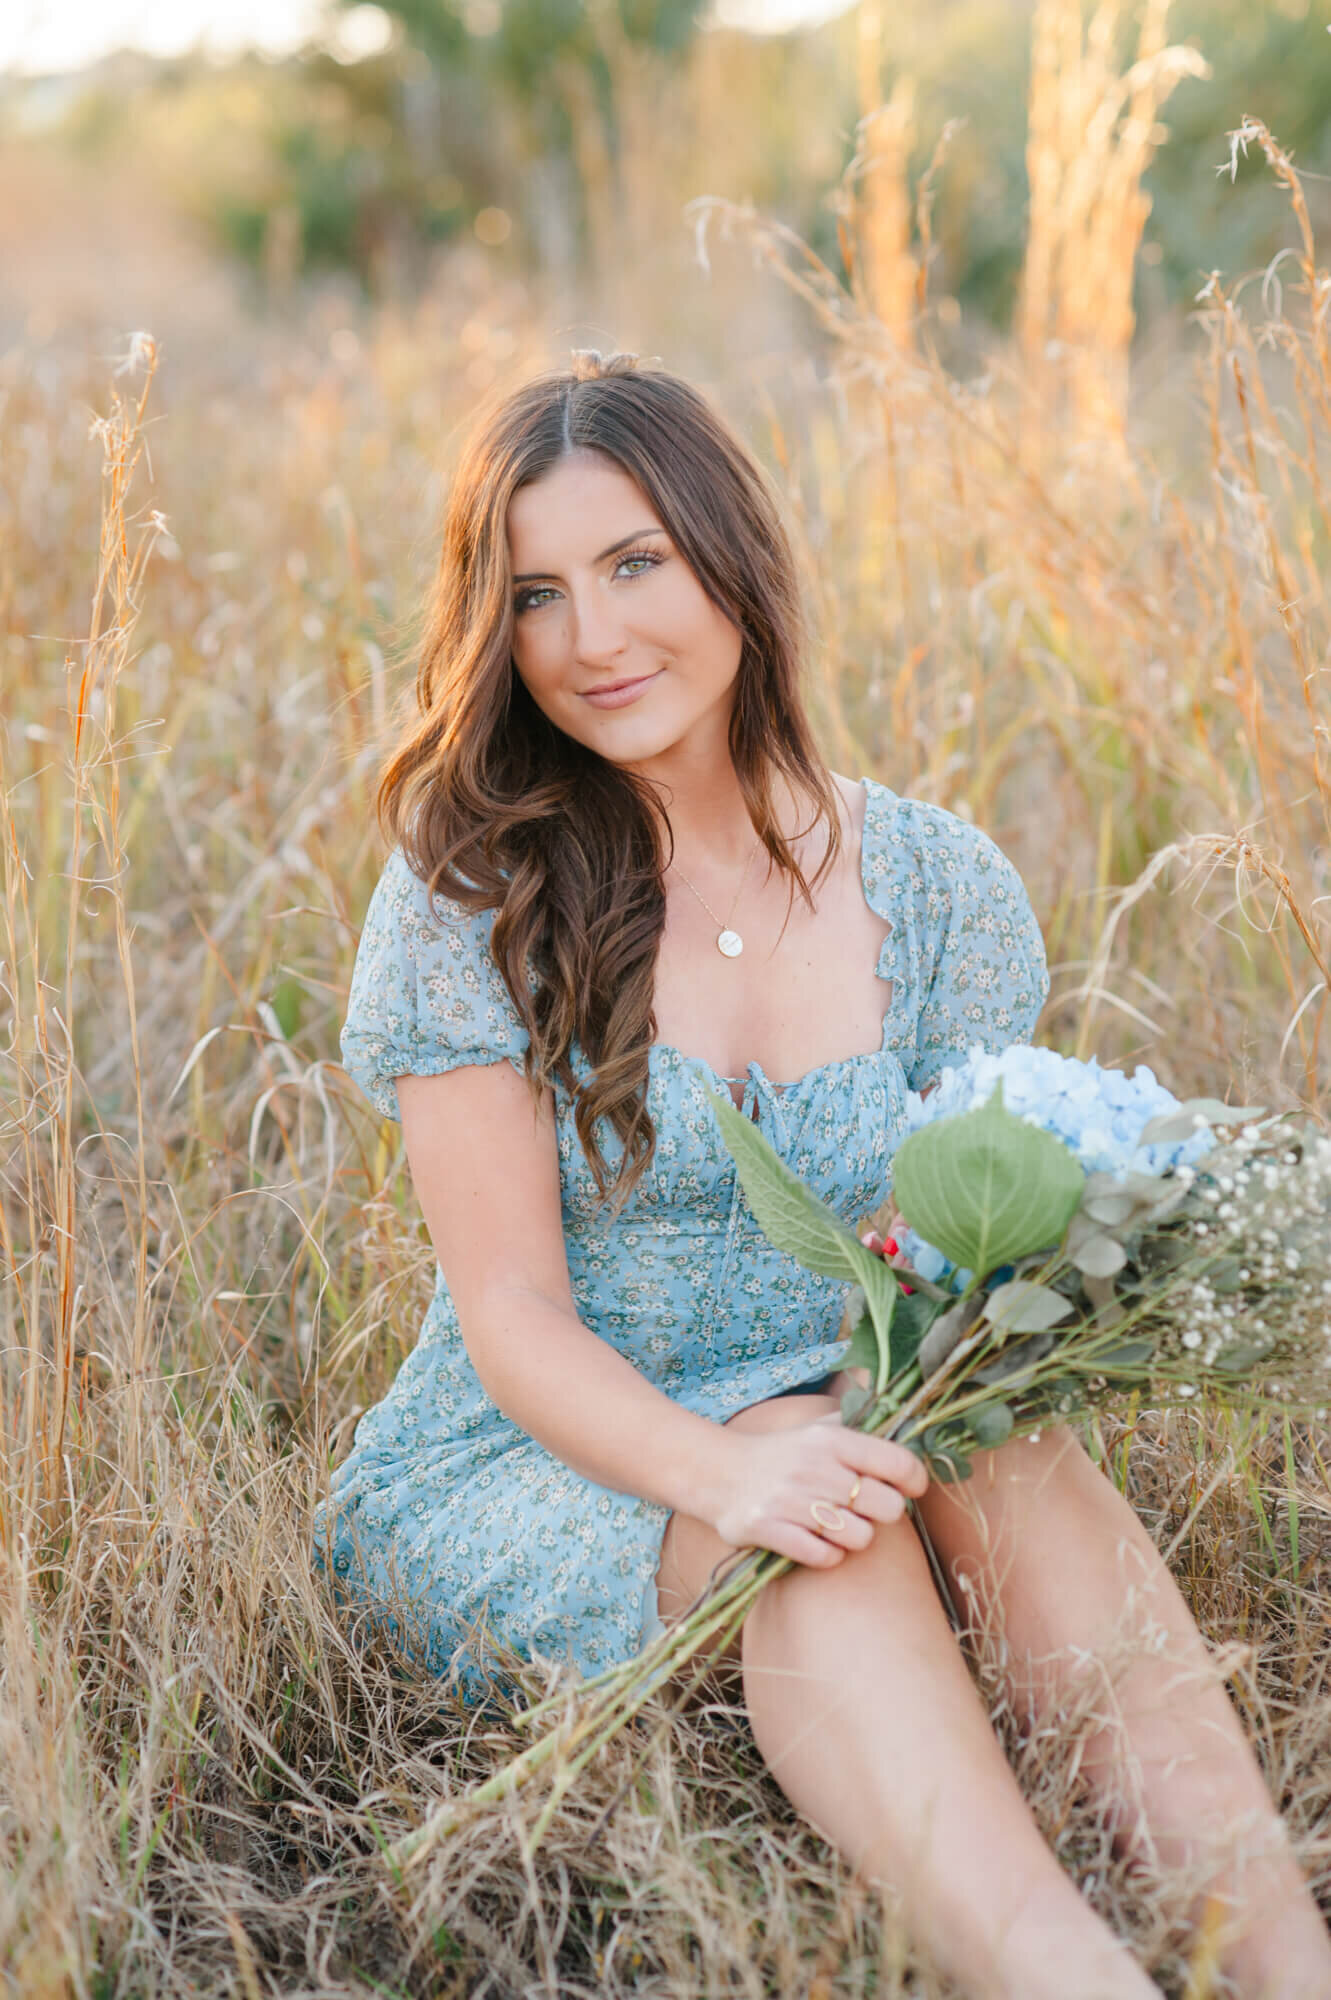 Senior girl sitting in tall grass at sunset sitting in a blue dress holding florals